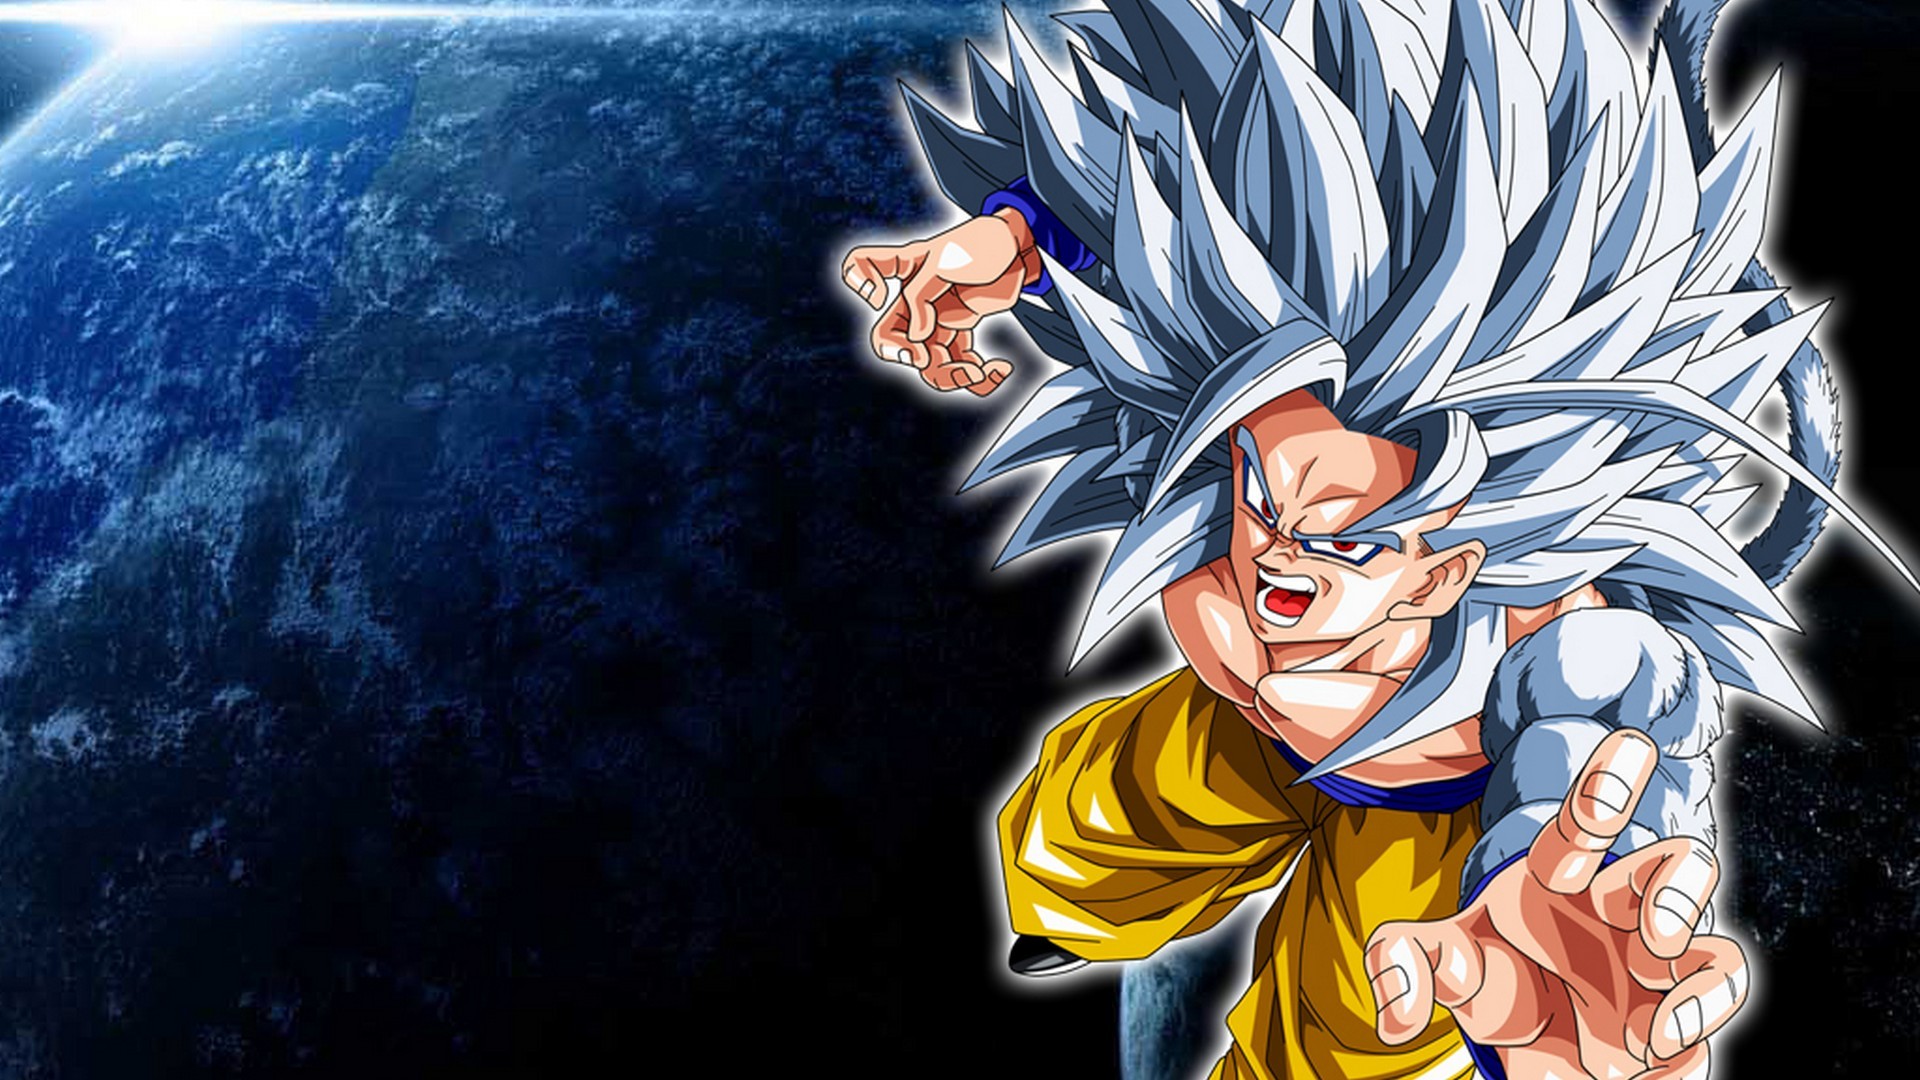 Goku Super Saiyan 5 Wallpaper with resolution 1920X1080 pixel. You can use this wallpaper as background for your desktop Computer Screensavers, Android or iPhone smartphones